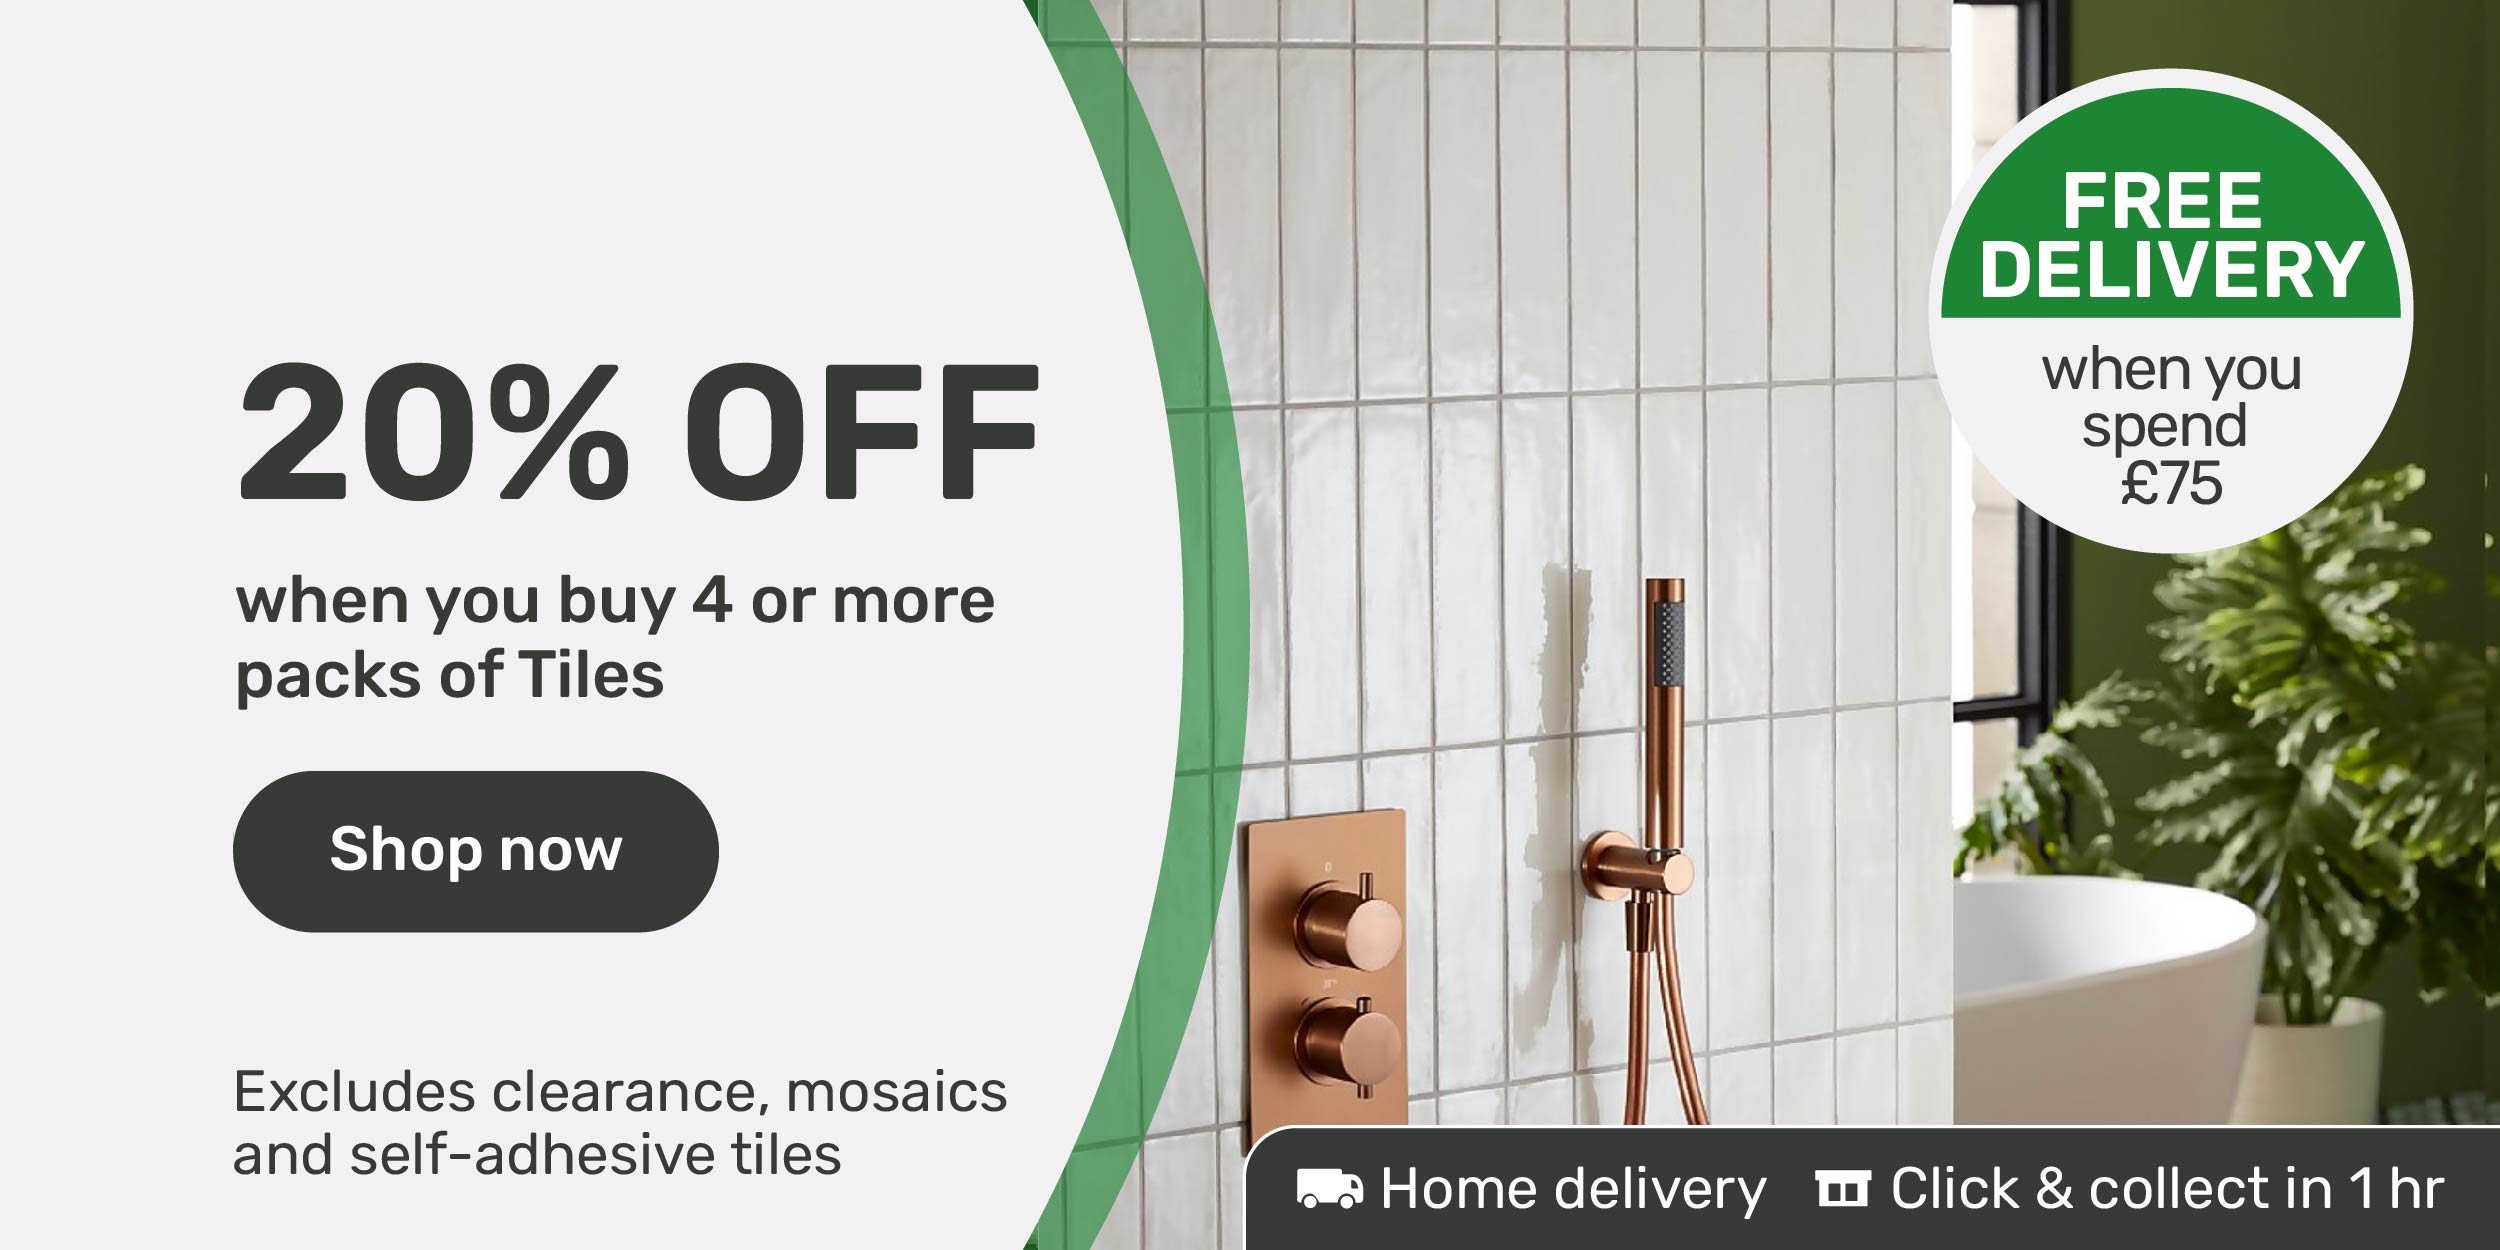 20% off when you buy 4 packs or more of Tiles